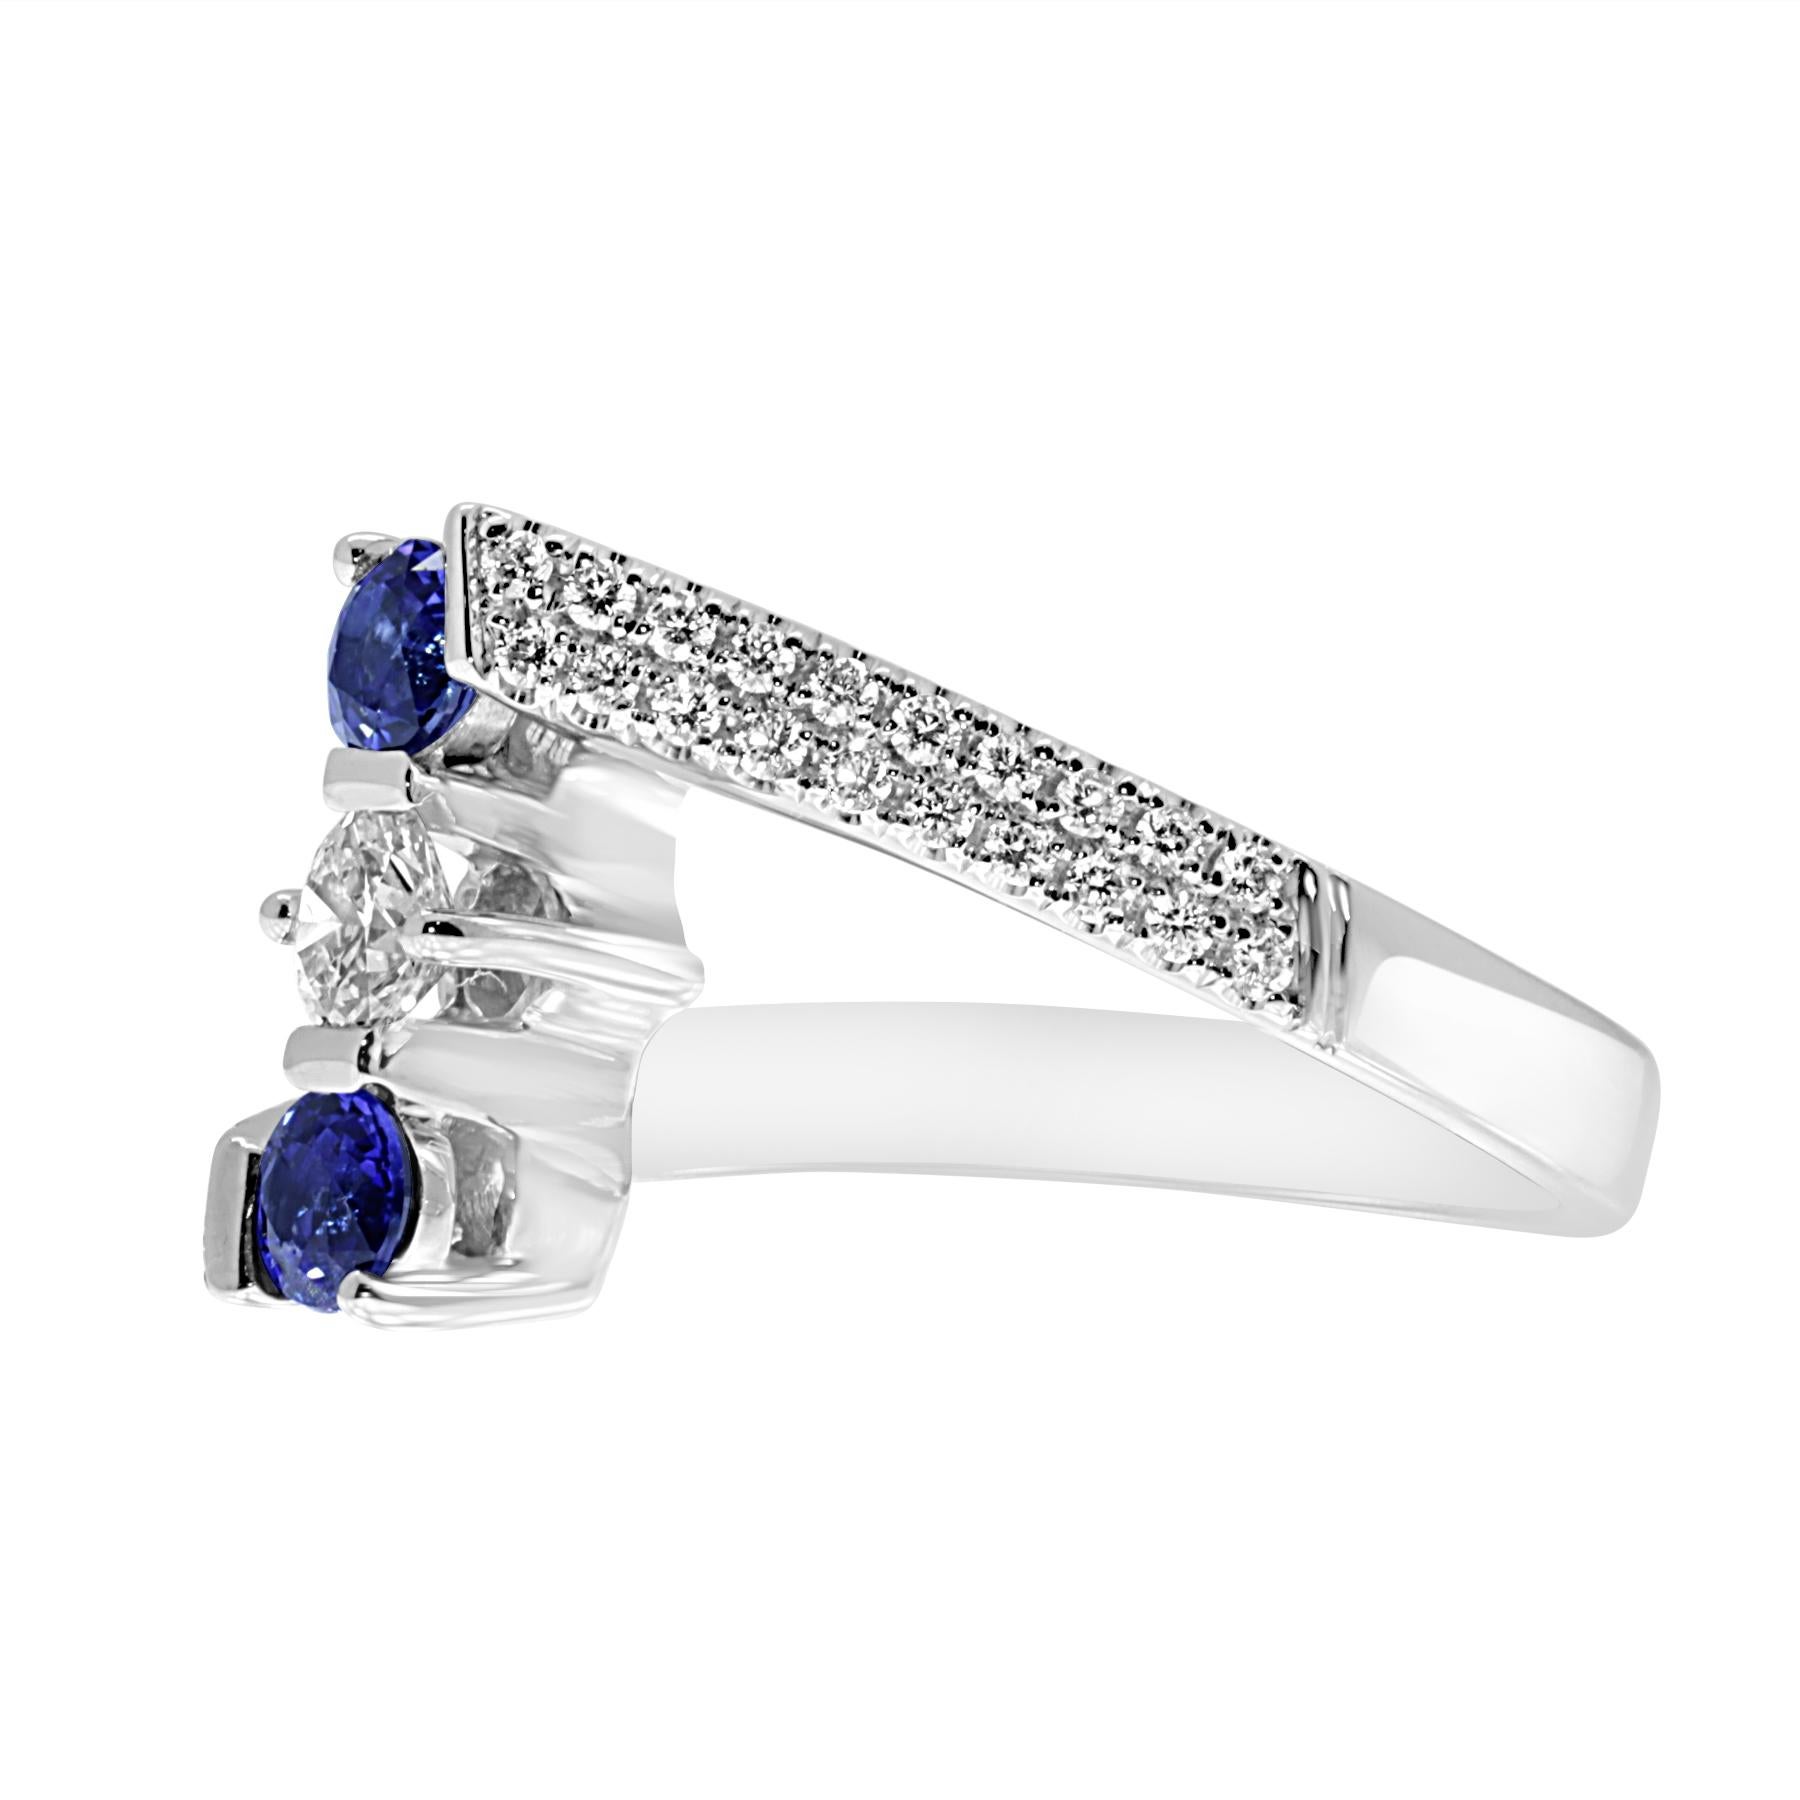 this unique piece is made of 18kt white gold, featuring two round cut blue sapphires of 0.59ct in total 
and (41) white brilliant cut diamonds. 
to make this piece more prestigious we've decided to add two rows of pave set diamonds on each side.
a